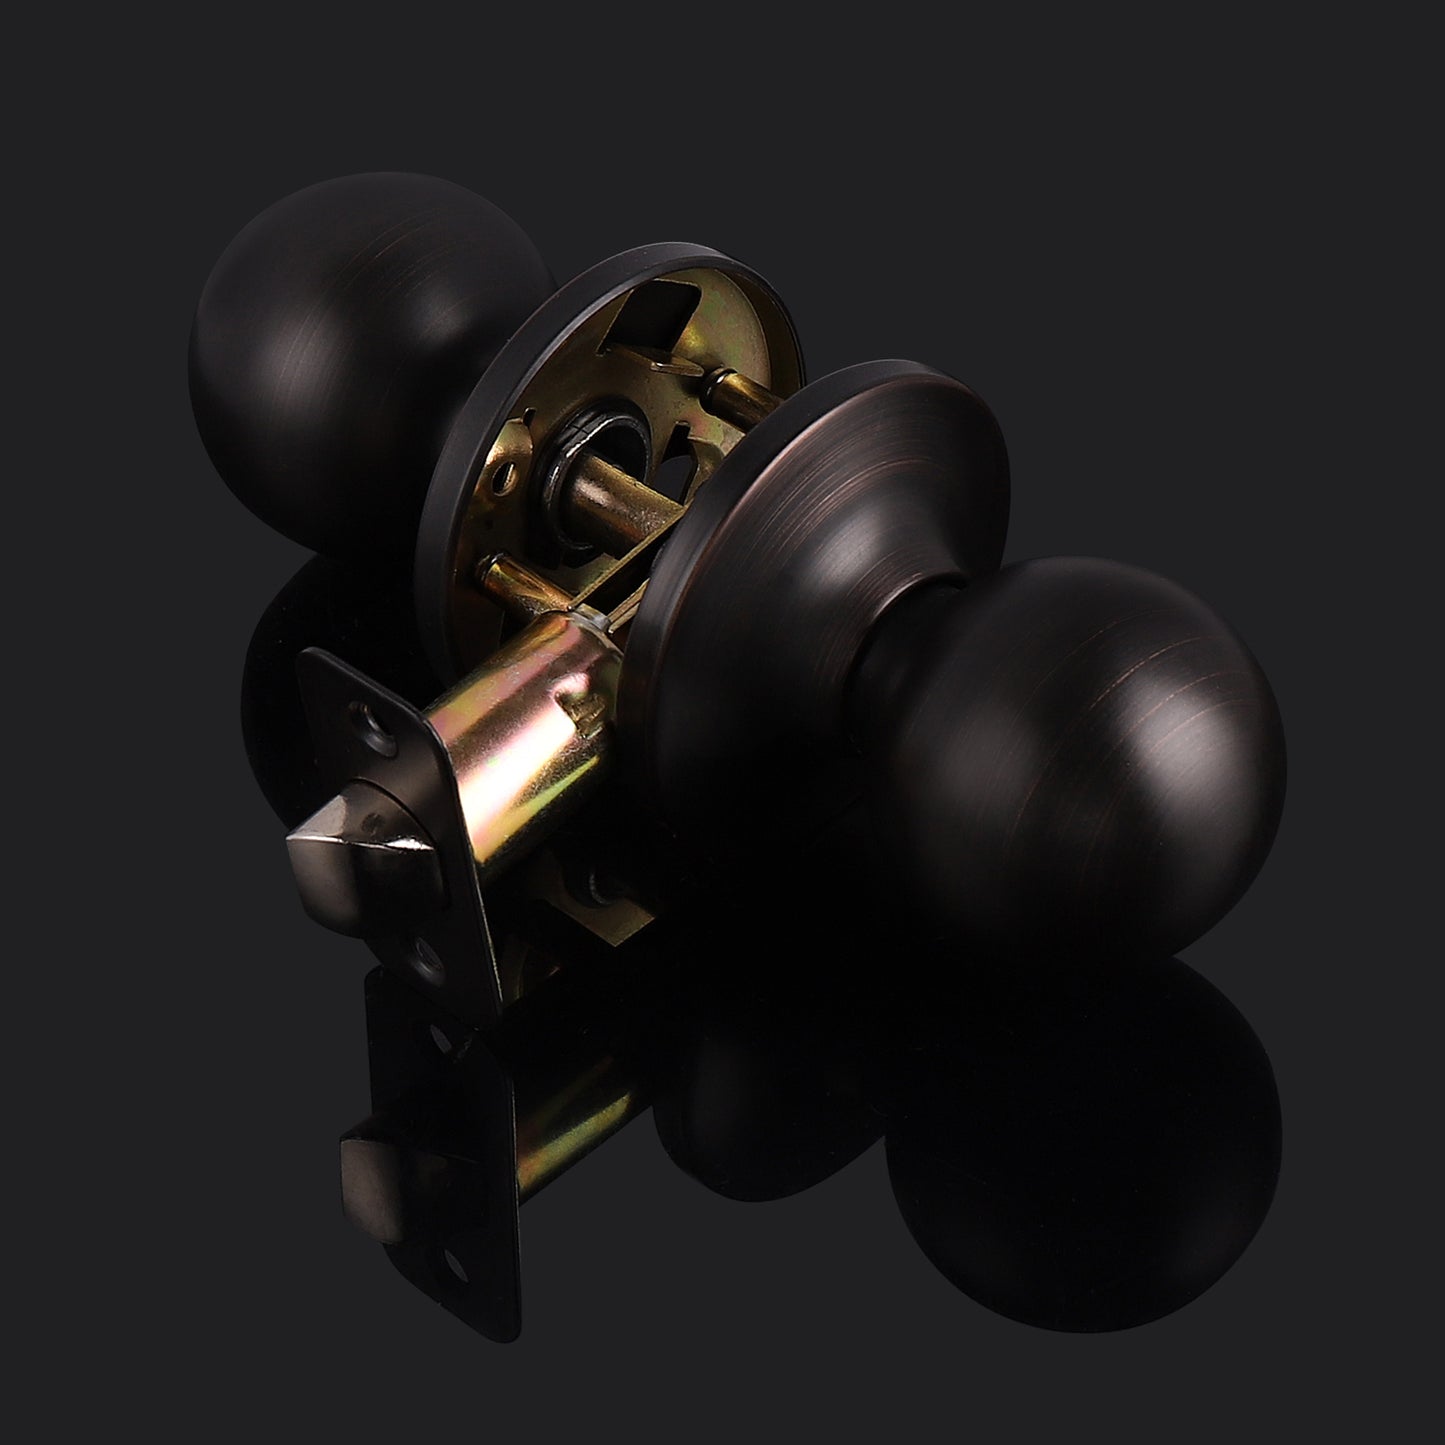 Round Ball Door Knobs Keyledd Passage Function for Closet Hall, Oil Rubbed Bronze Finish- DL5763ORBPS - Probrico